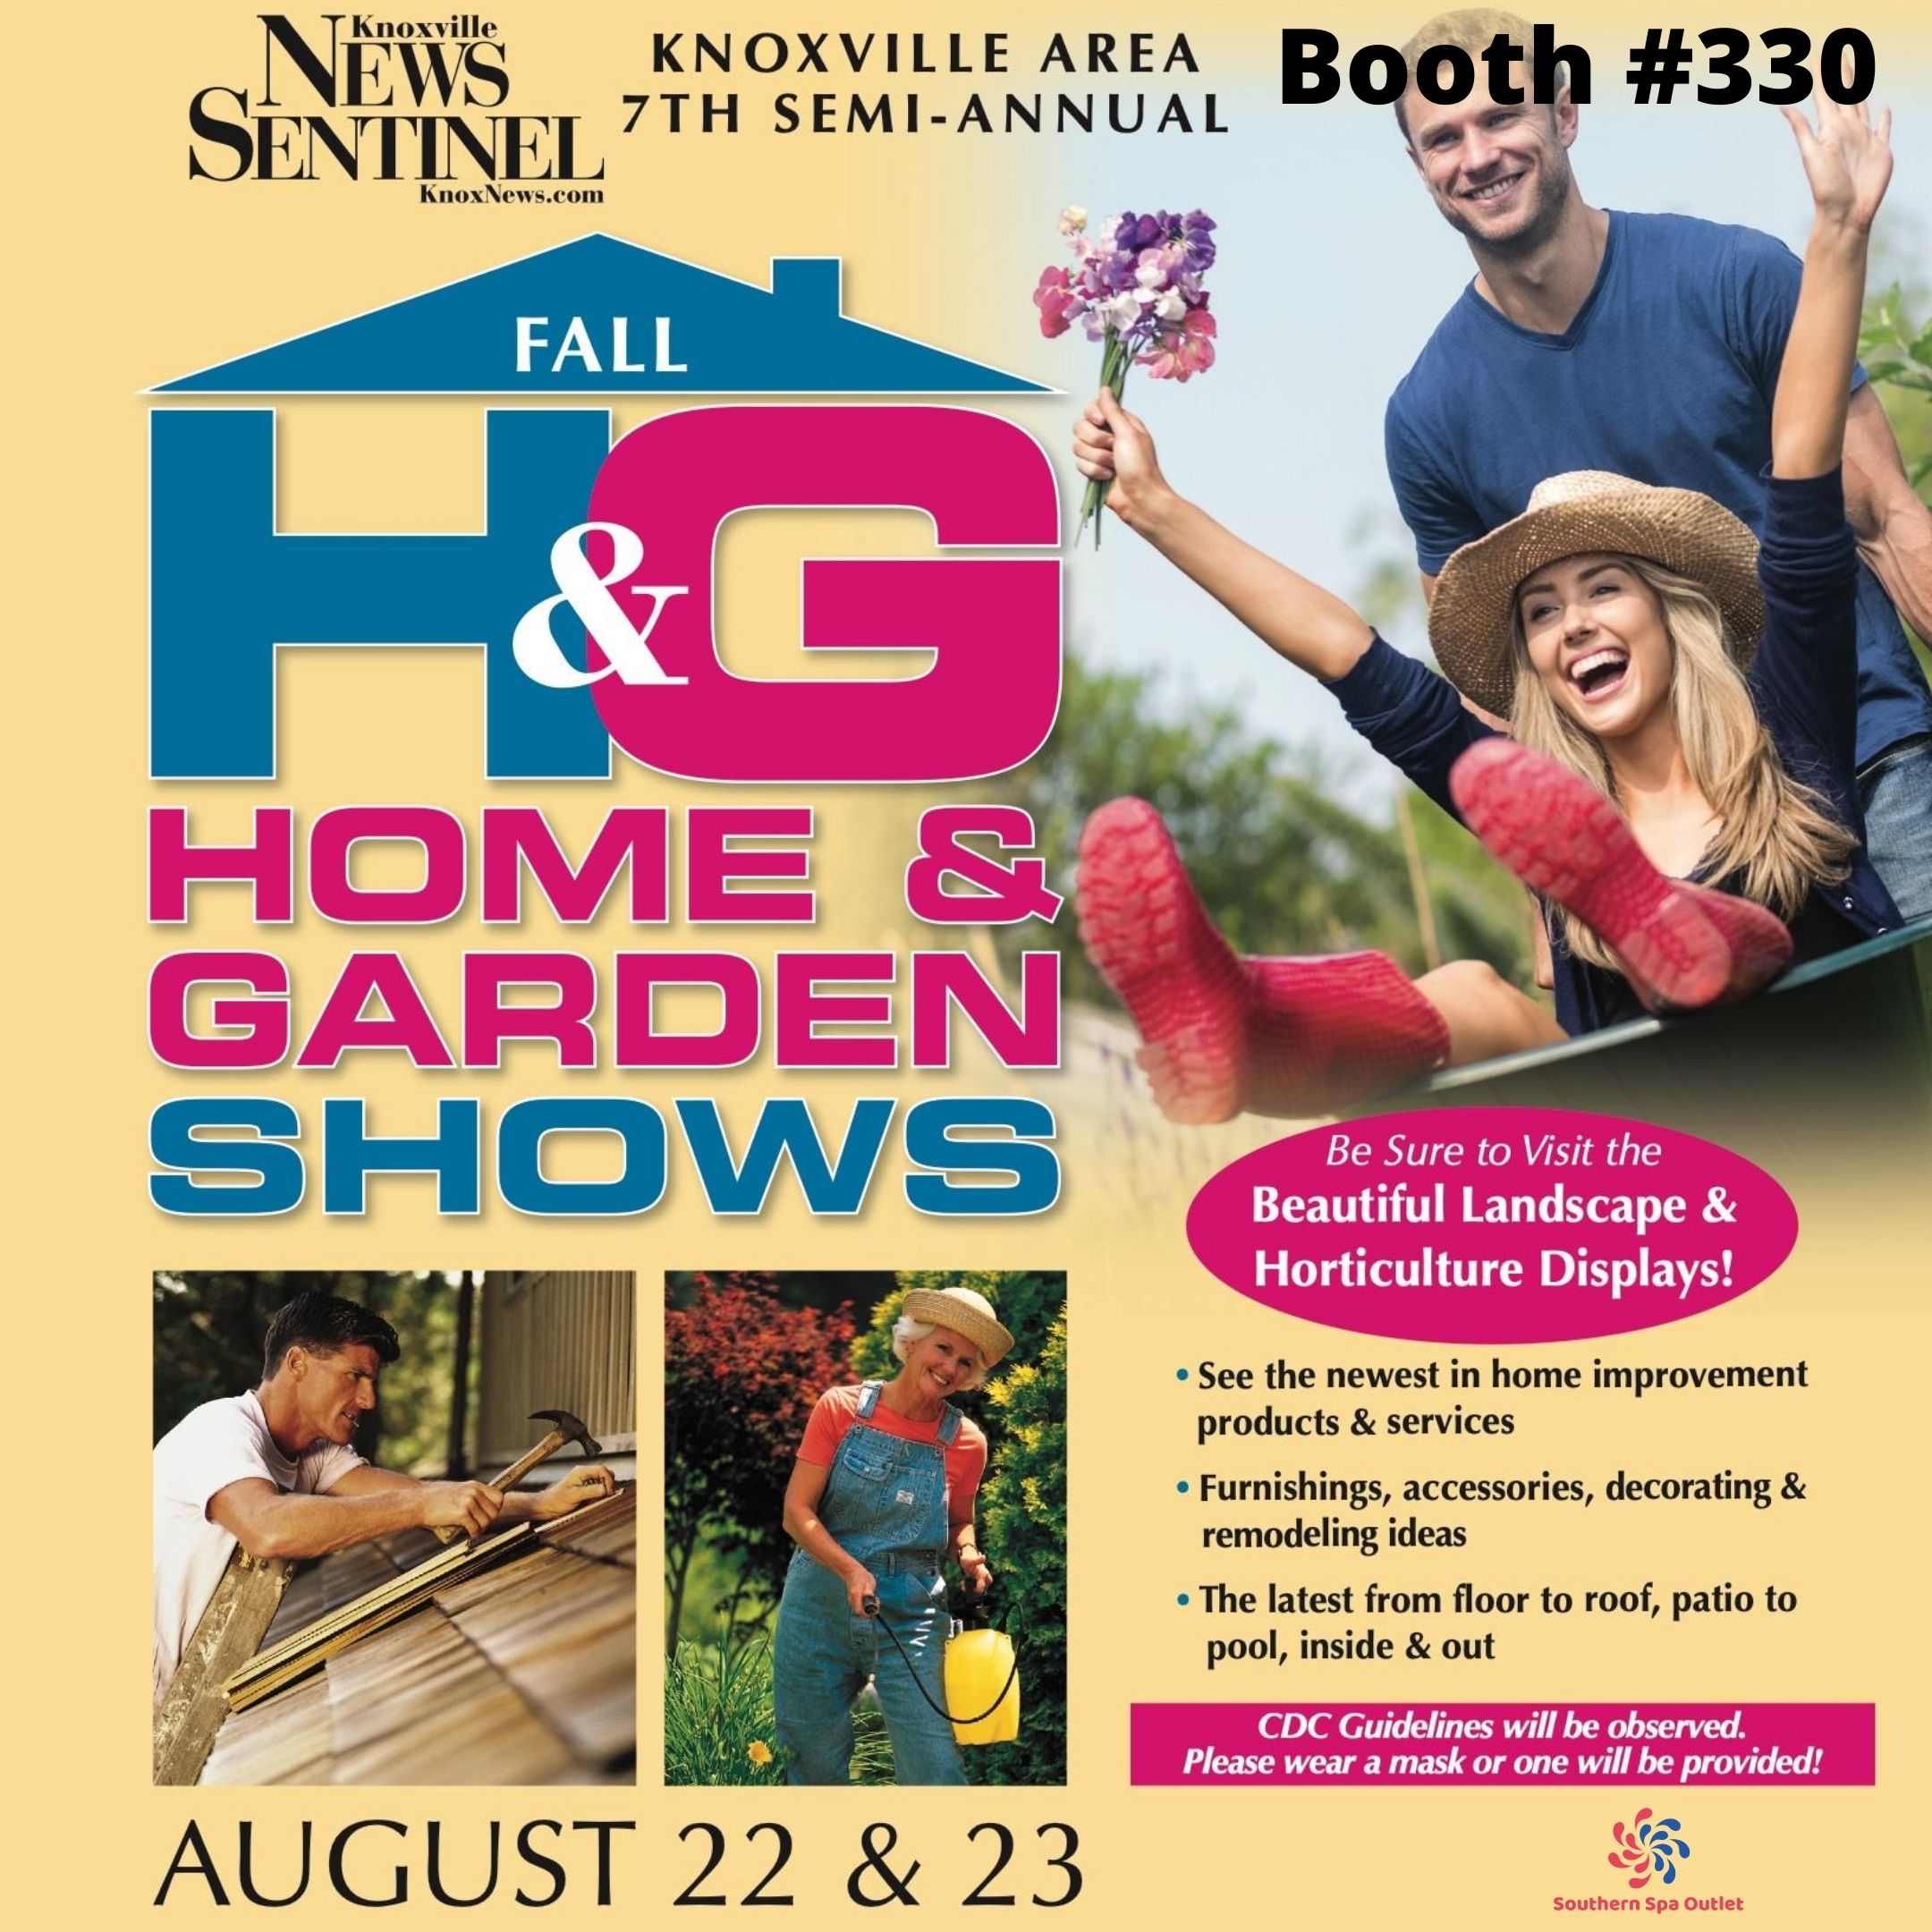 Home & Garden Show in Knoxville August 2020 Southern Spa Outlet